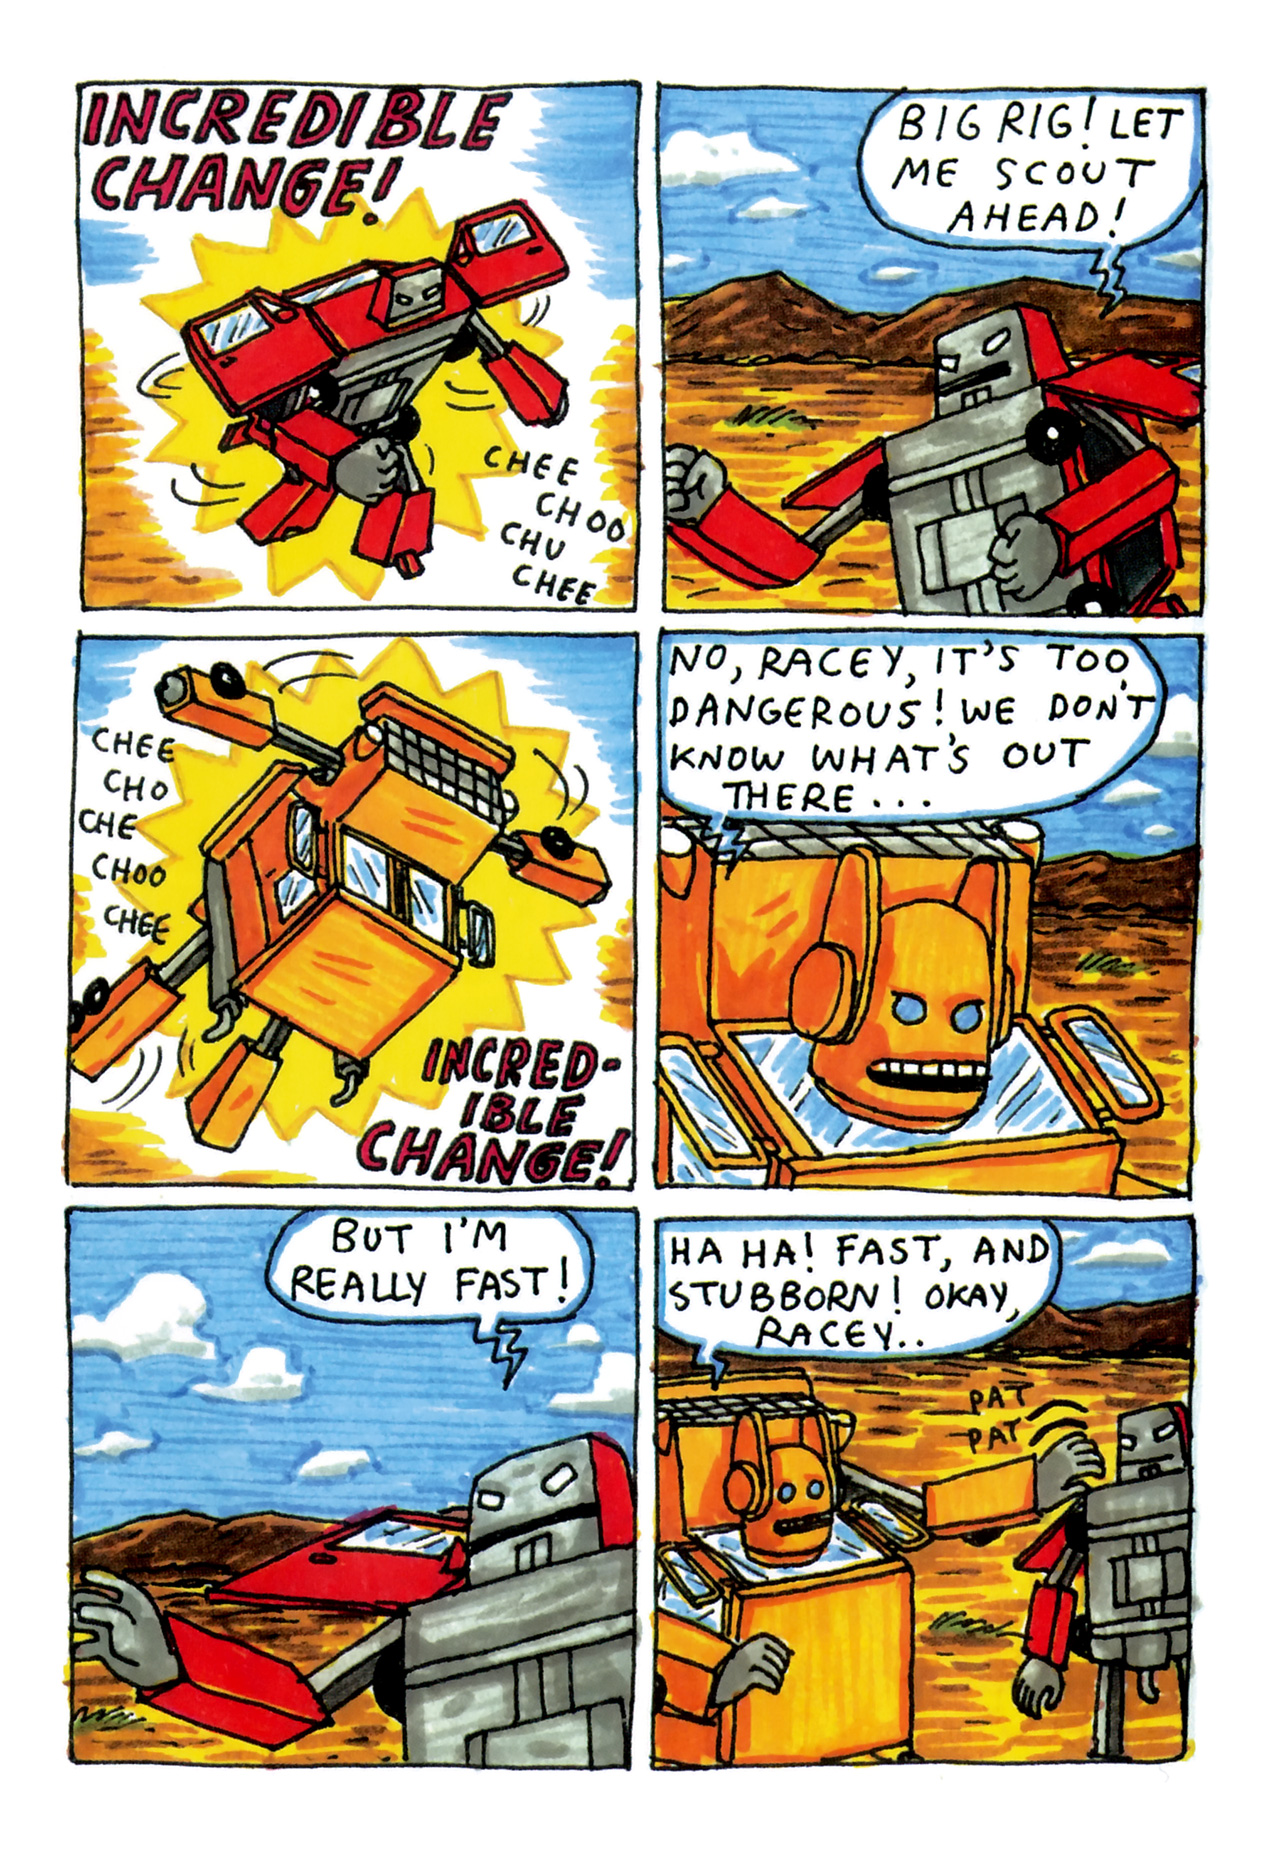 Read online Incredible Change-Bots comic -  Issue # TPB 1 - 36